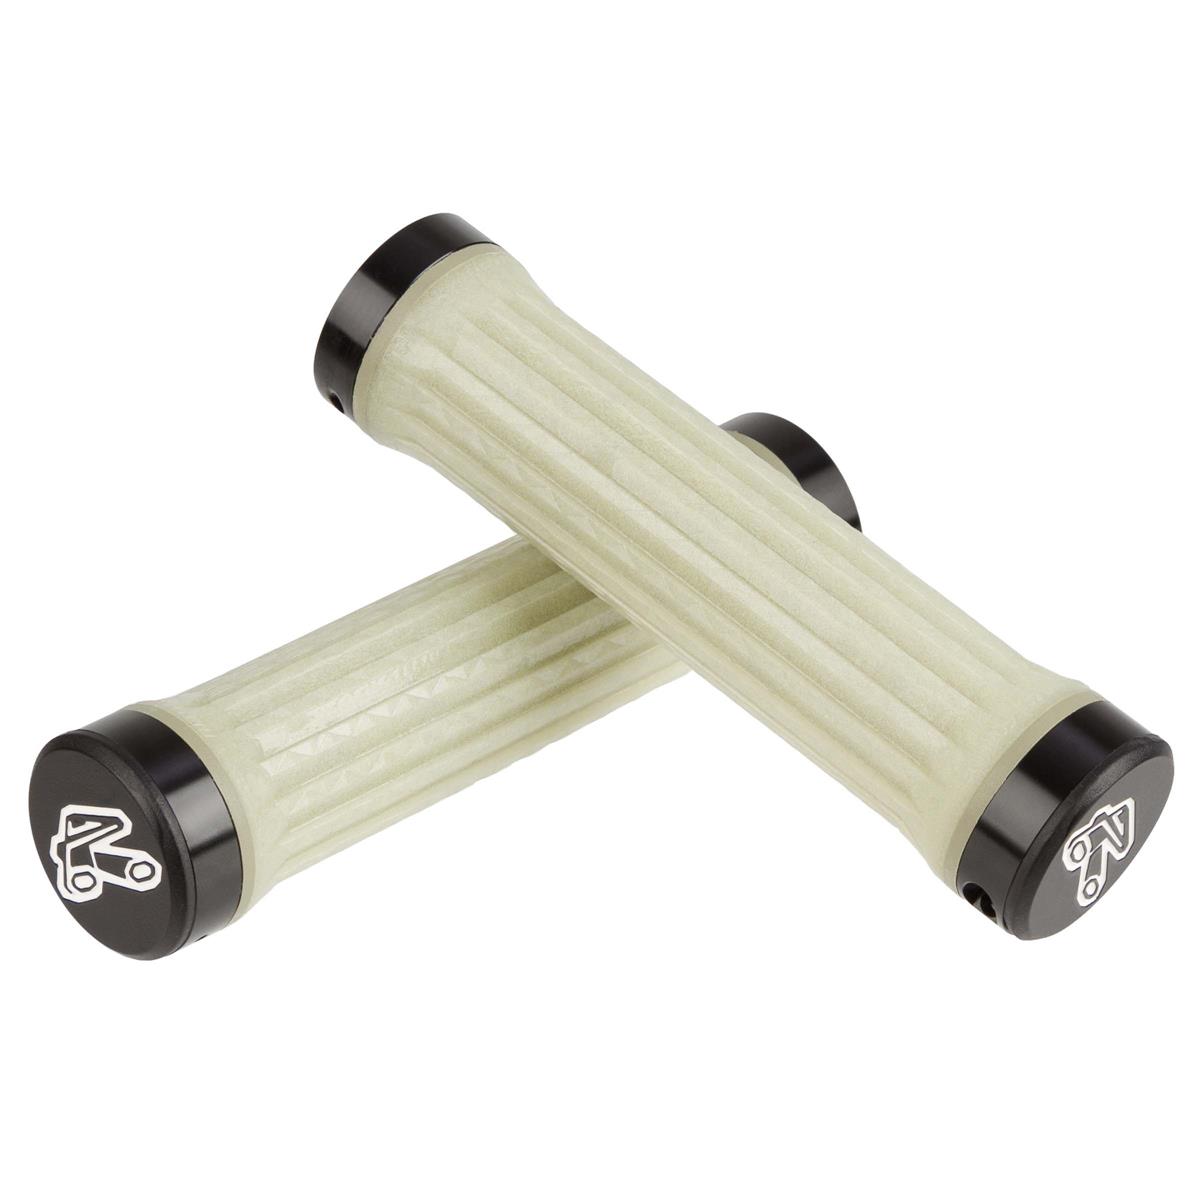 Renthal MTB Grips Traction Lock-On Aramide